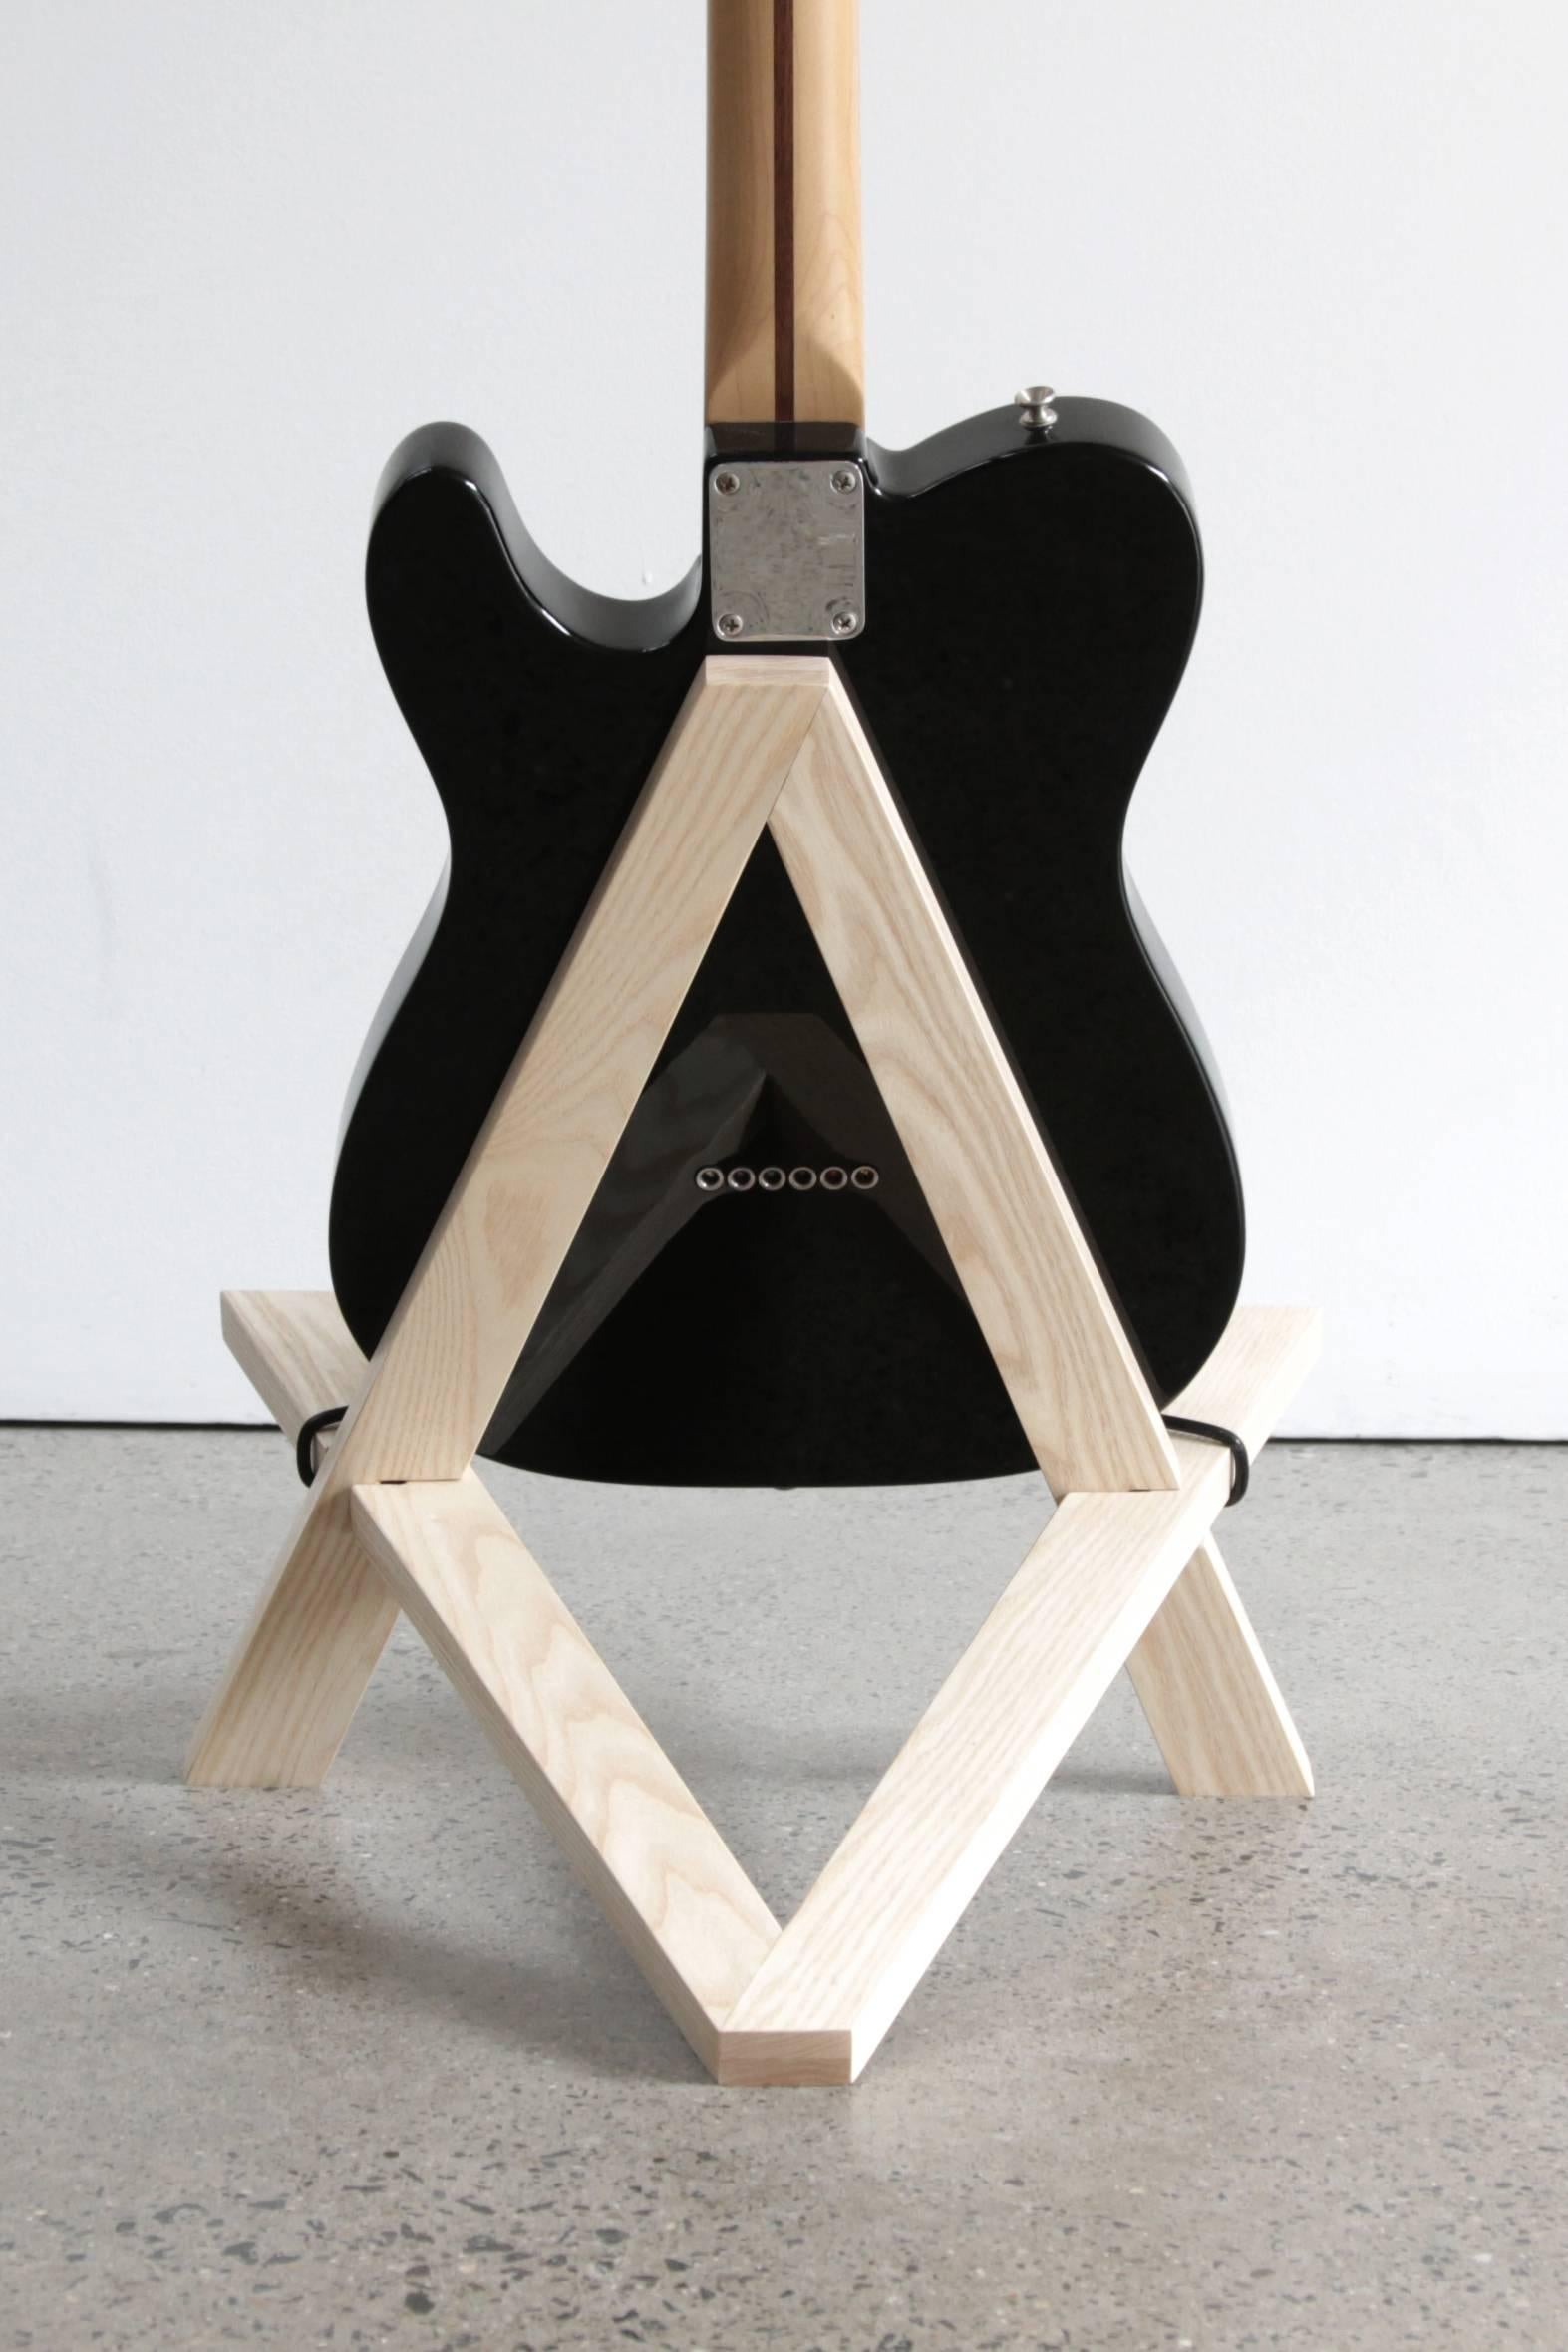 Swedish for “chair”, the Stol is a collapsible guitar stand designed for playing at home or in the studio. Simply snap the two identical wood frames together to use the stand, and then knock them back down to store flat. The adjustable rubber ring